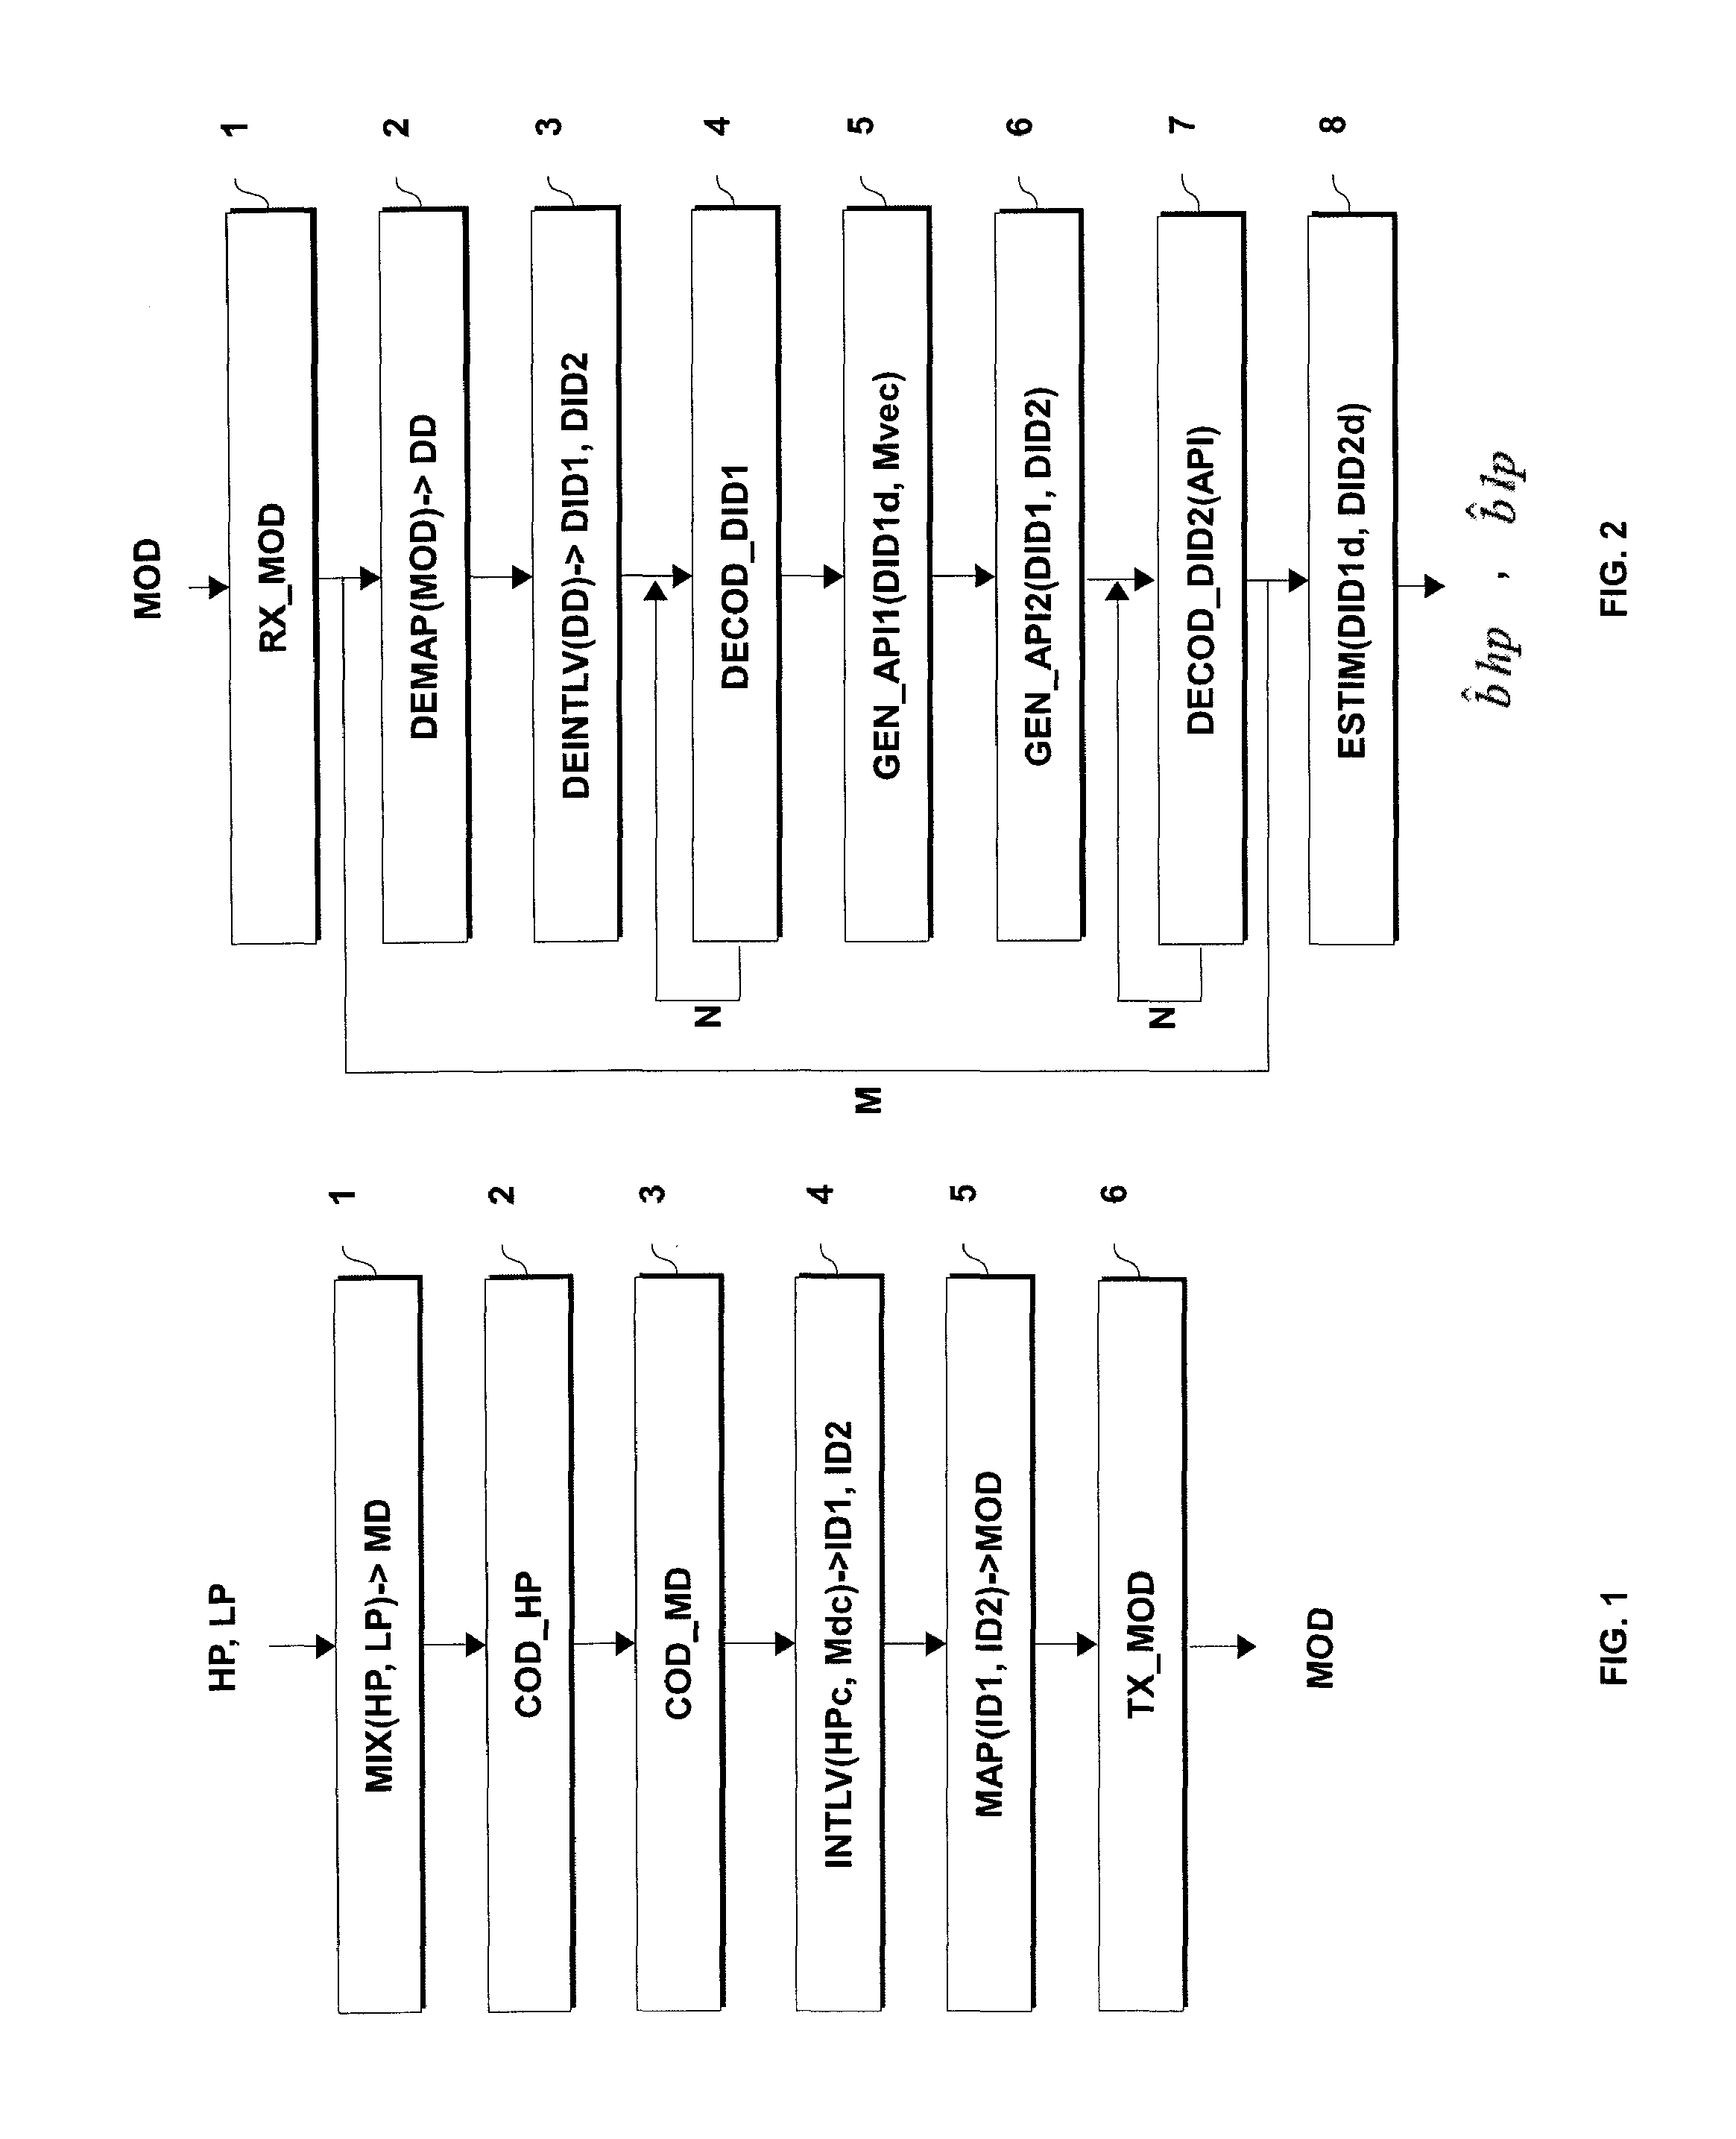 Transmitting method and a receiving method of a modulated data stream